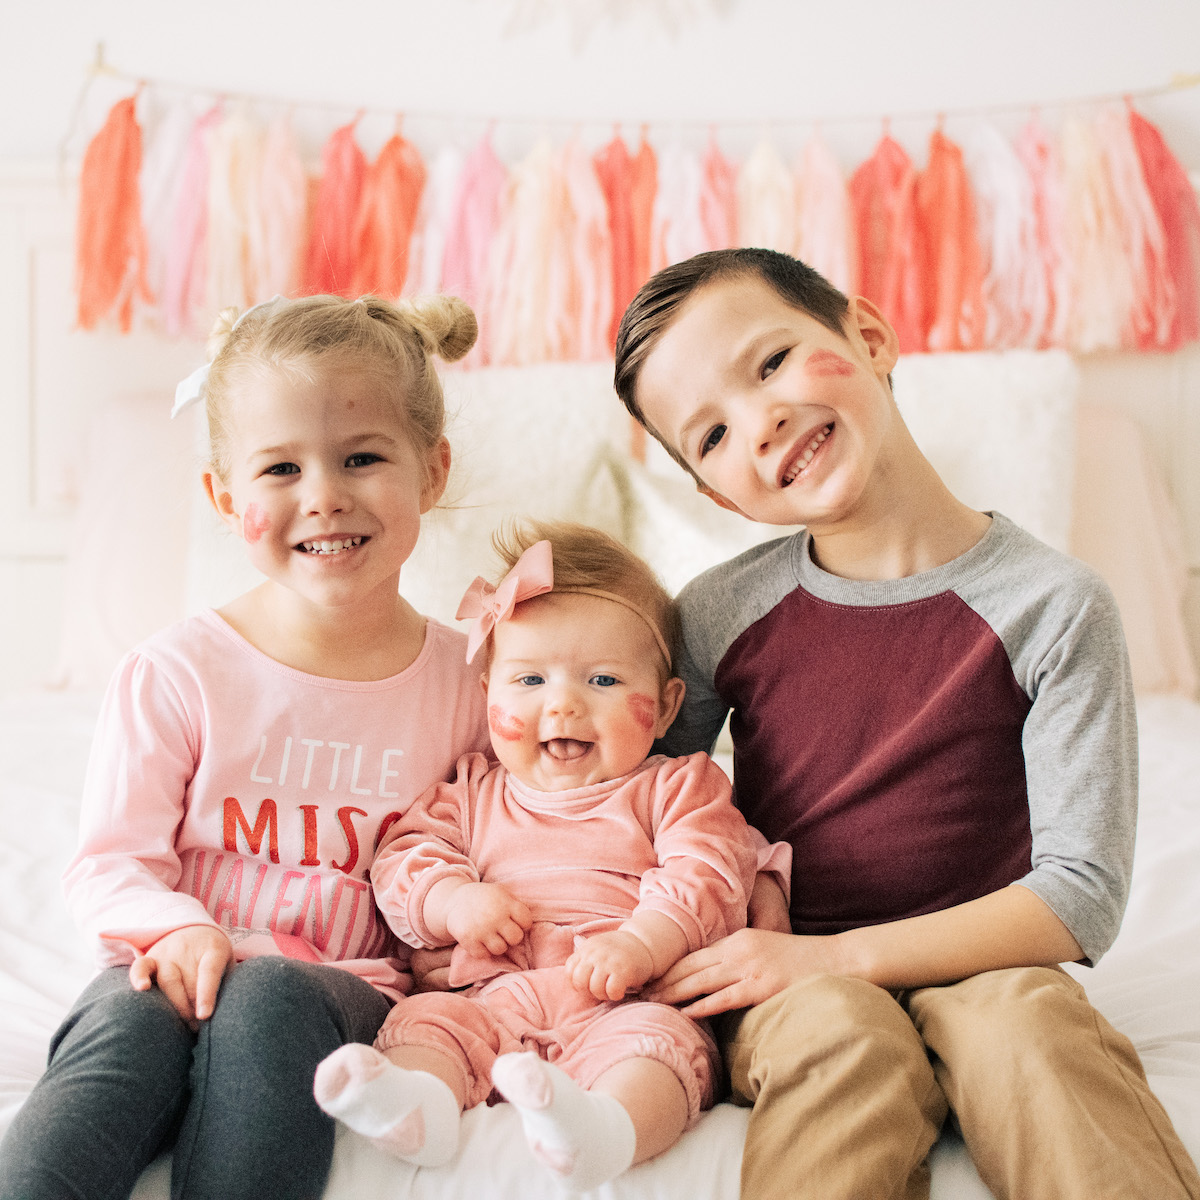 3 Children pose with lipstick kisses on their faces in front of a pink garland.